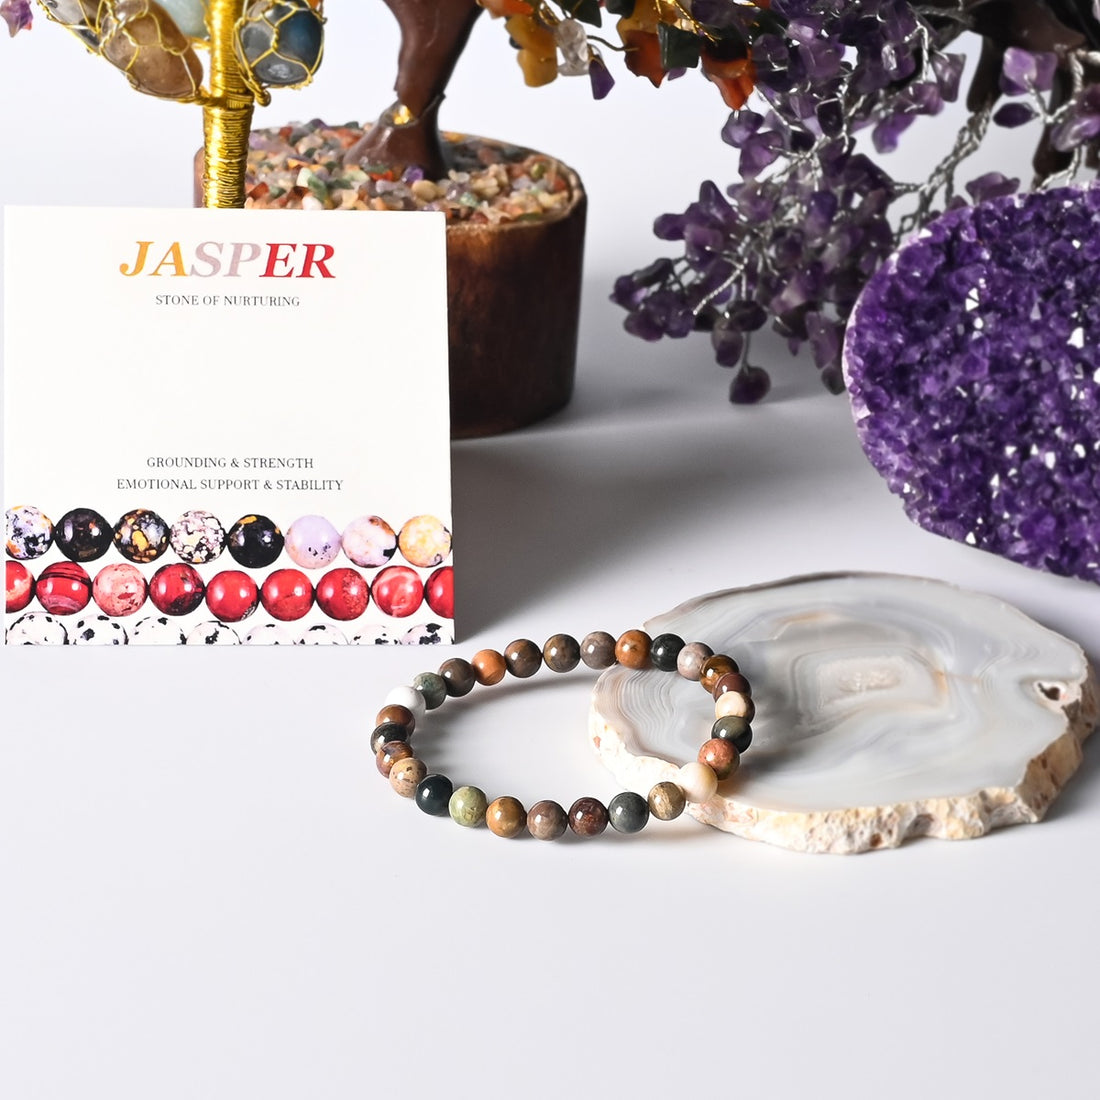 Stylish Ocean Jasper Stretch Bracelet adorned with multicolor 6mm beads, a nurturing stone promoting harmony and emotional healing.